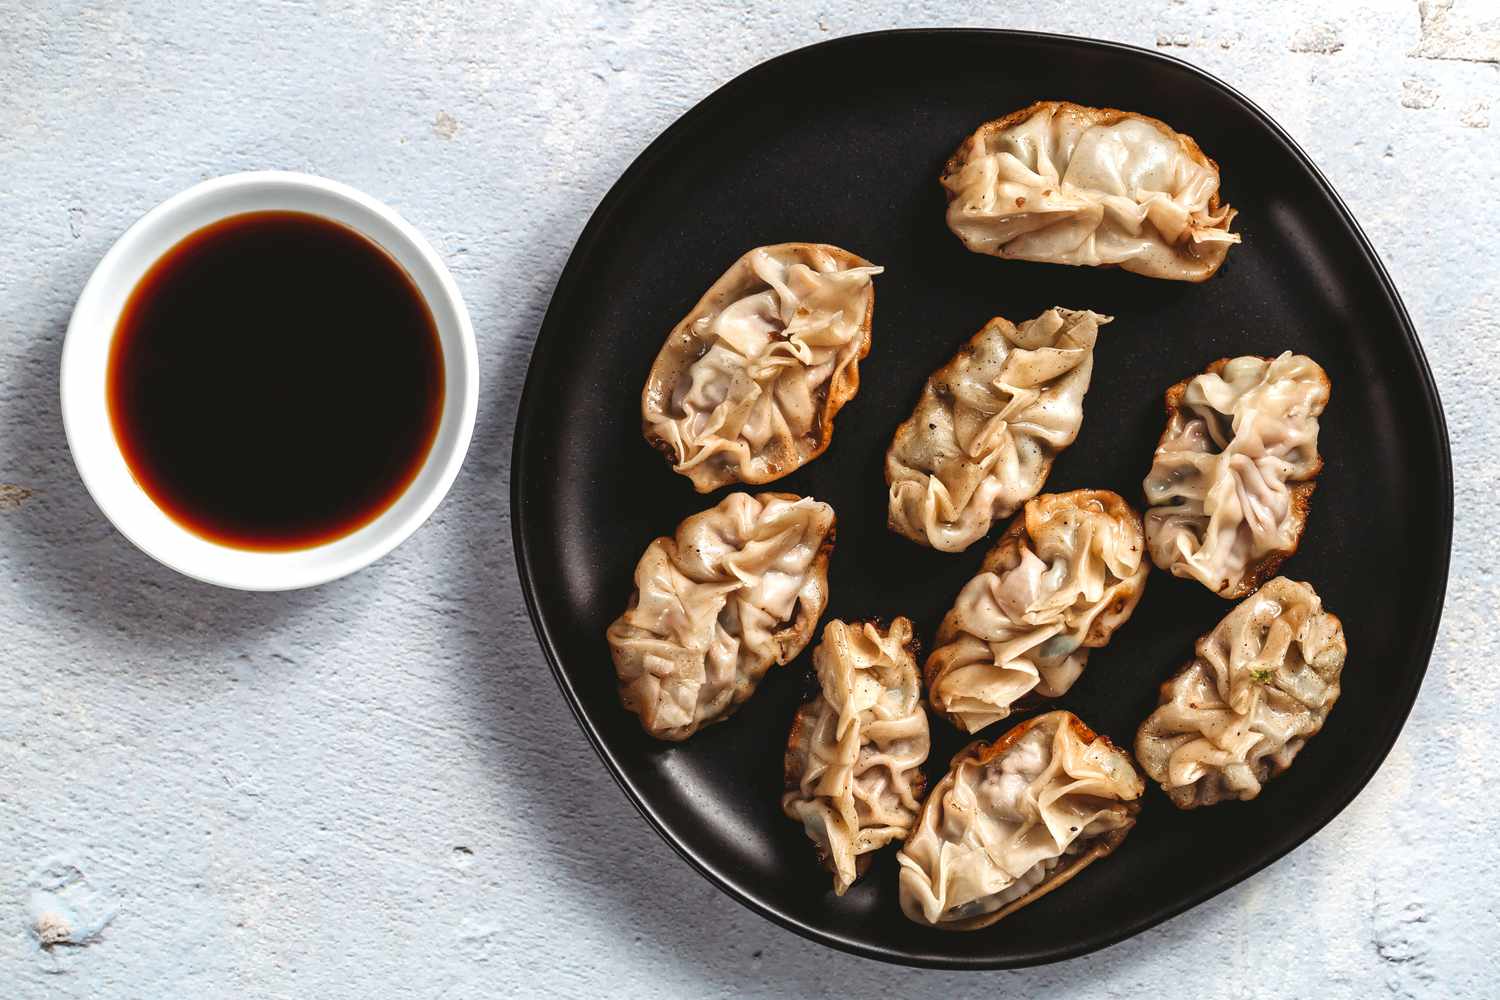 Dumplings served with dipping sauce